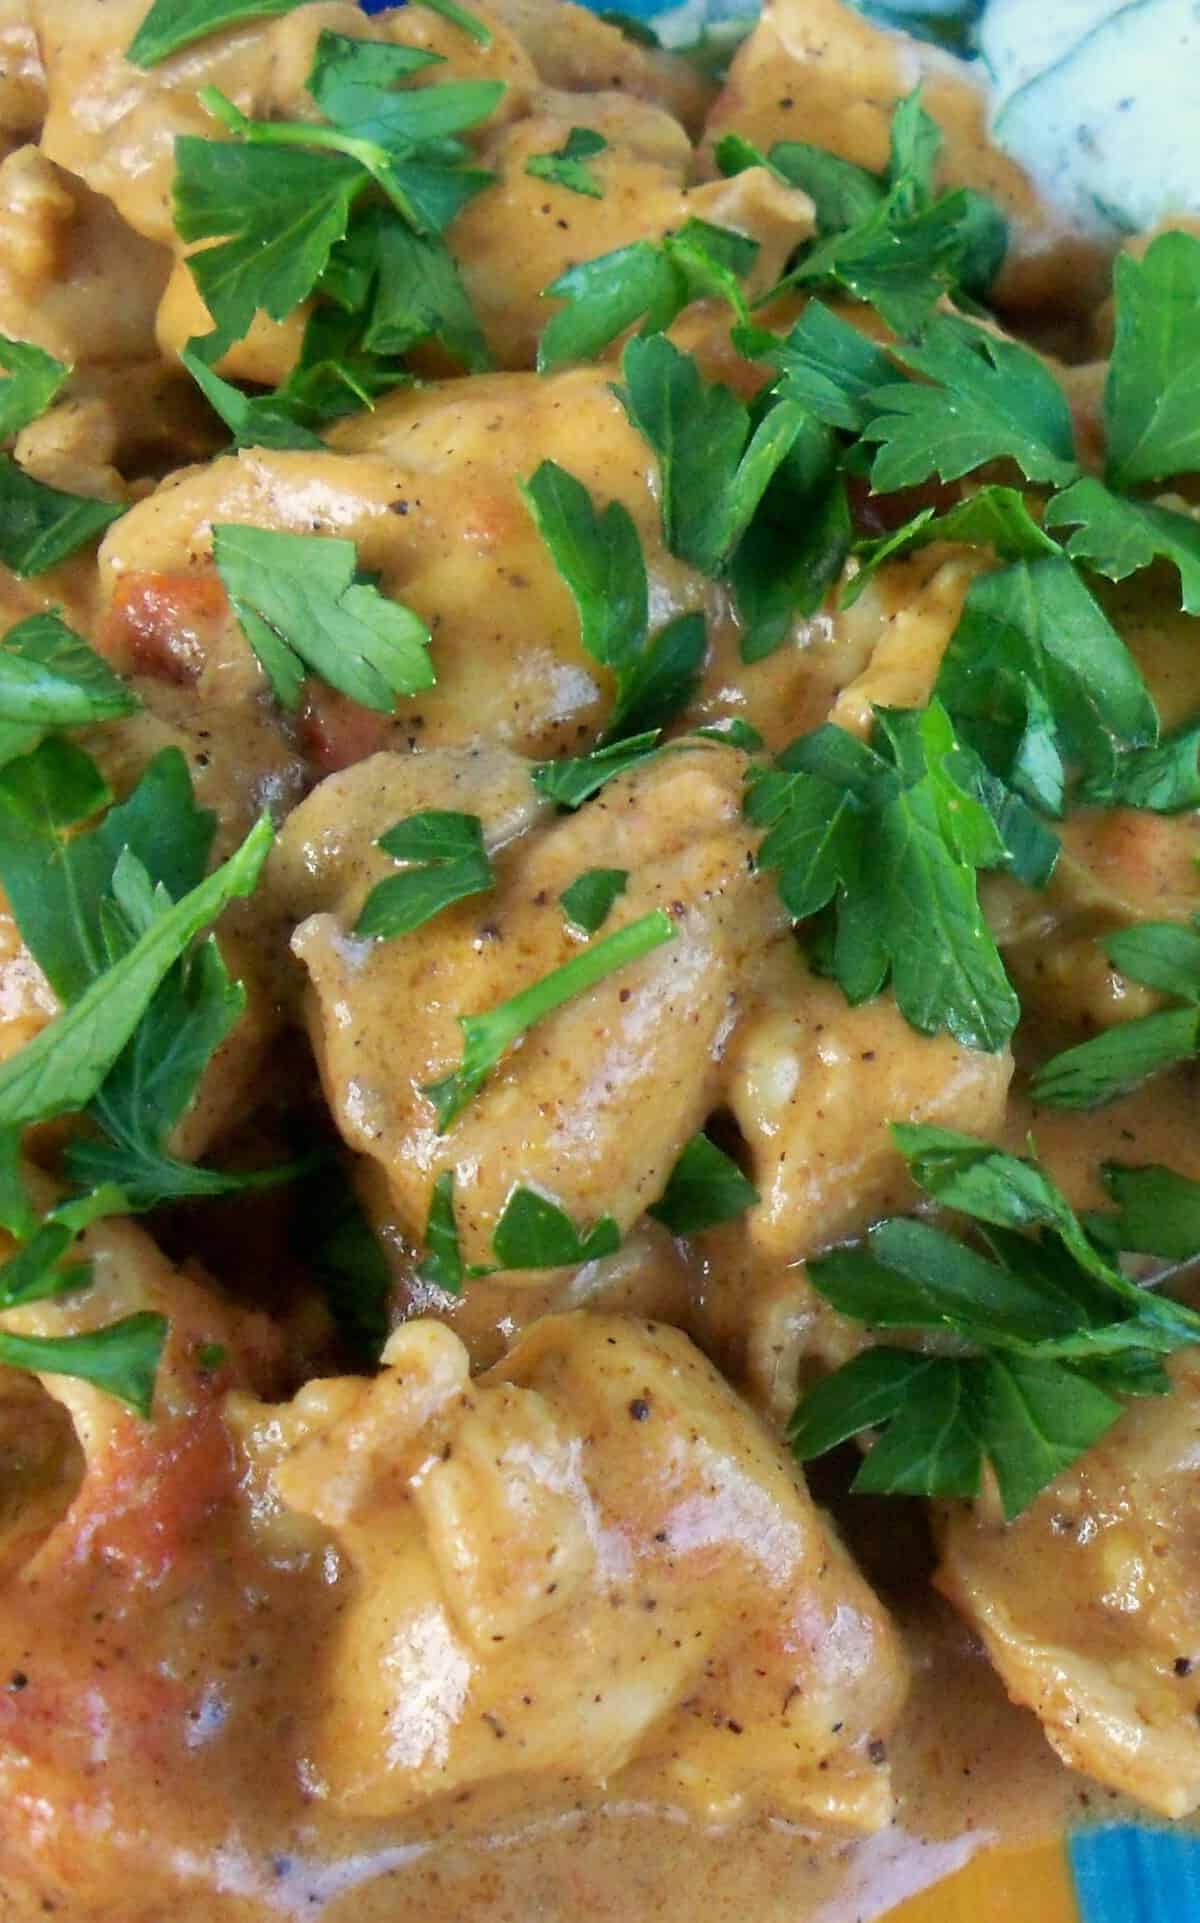  Aromatic spices blended with tender chicken in this African-inspired curry